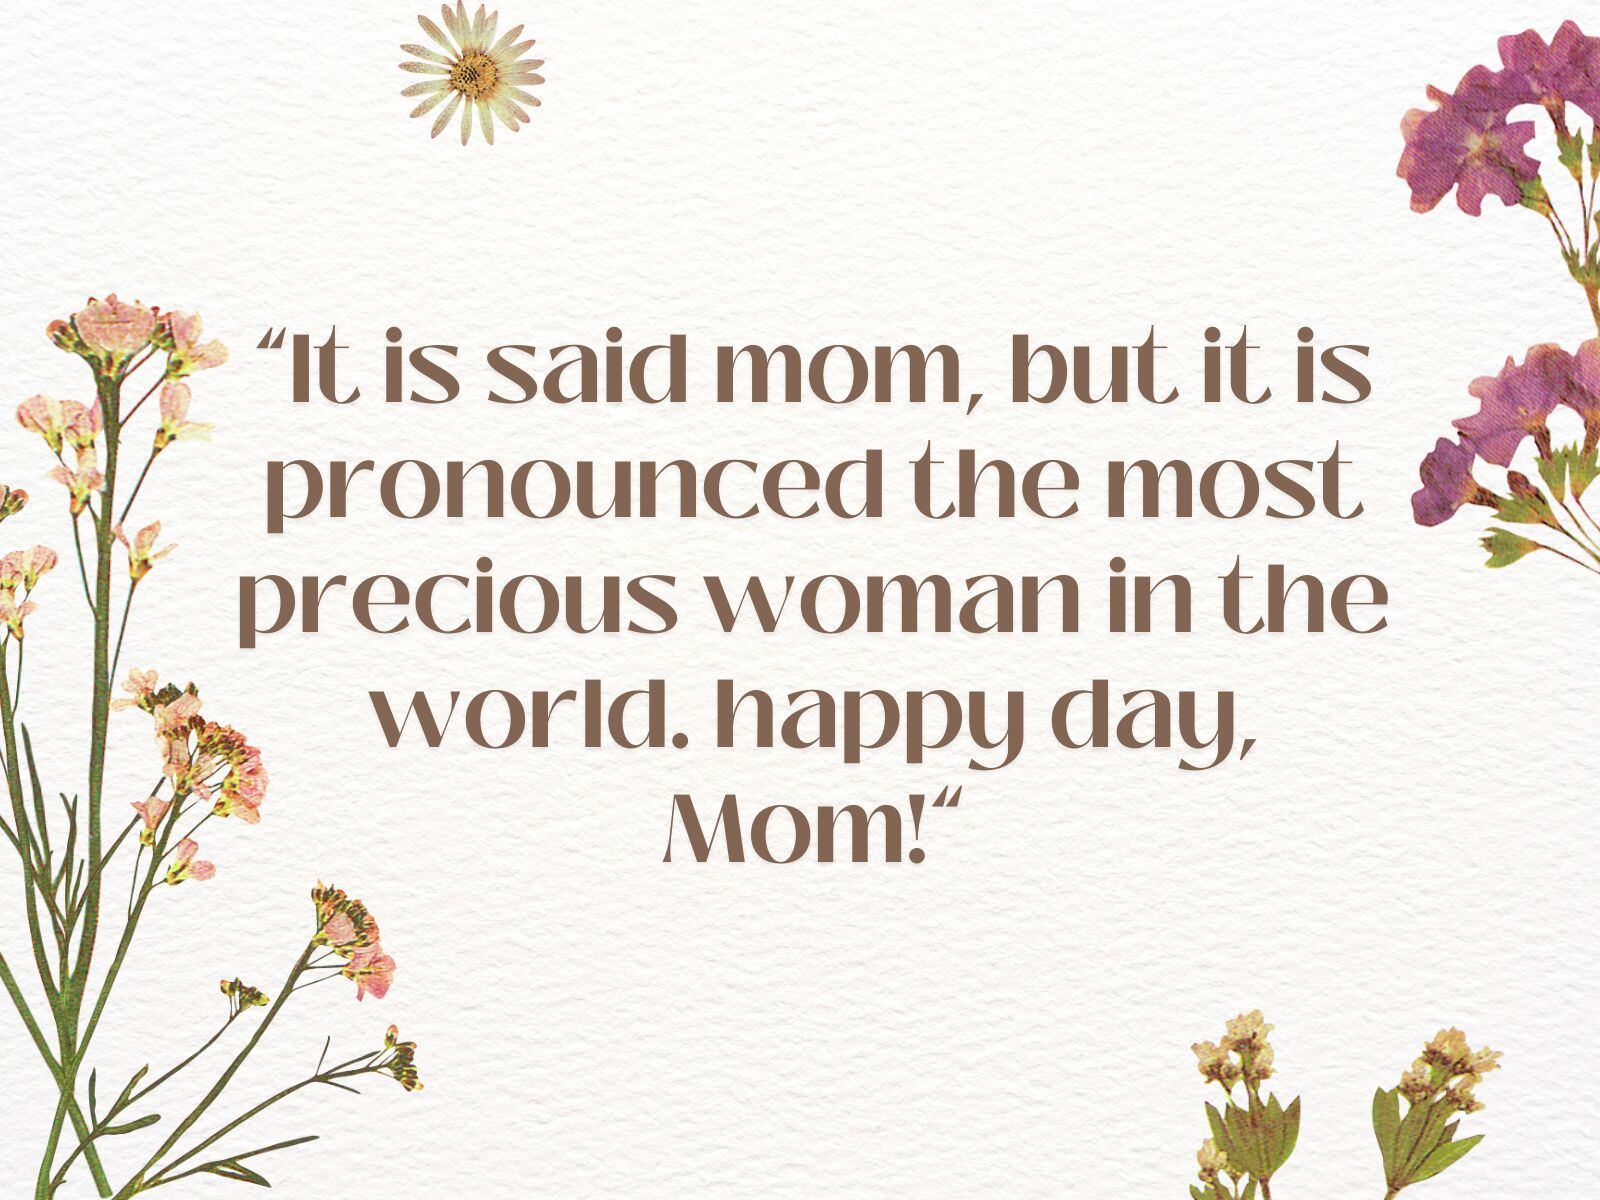 150 Best Happy Mother’s Day Quotes for mom you need to checkout